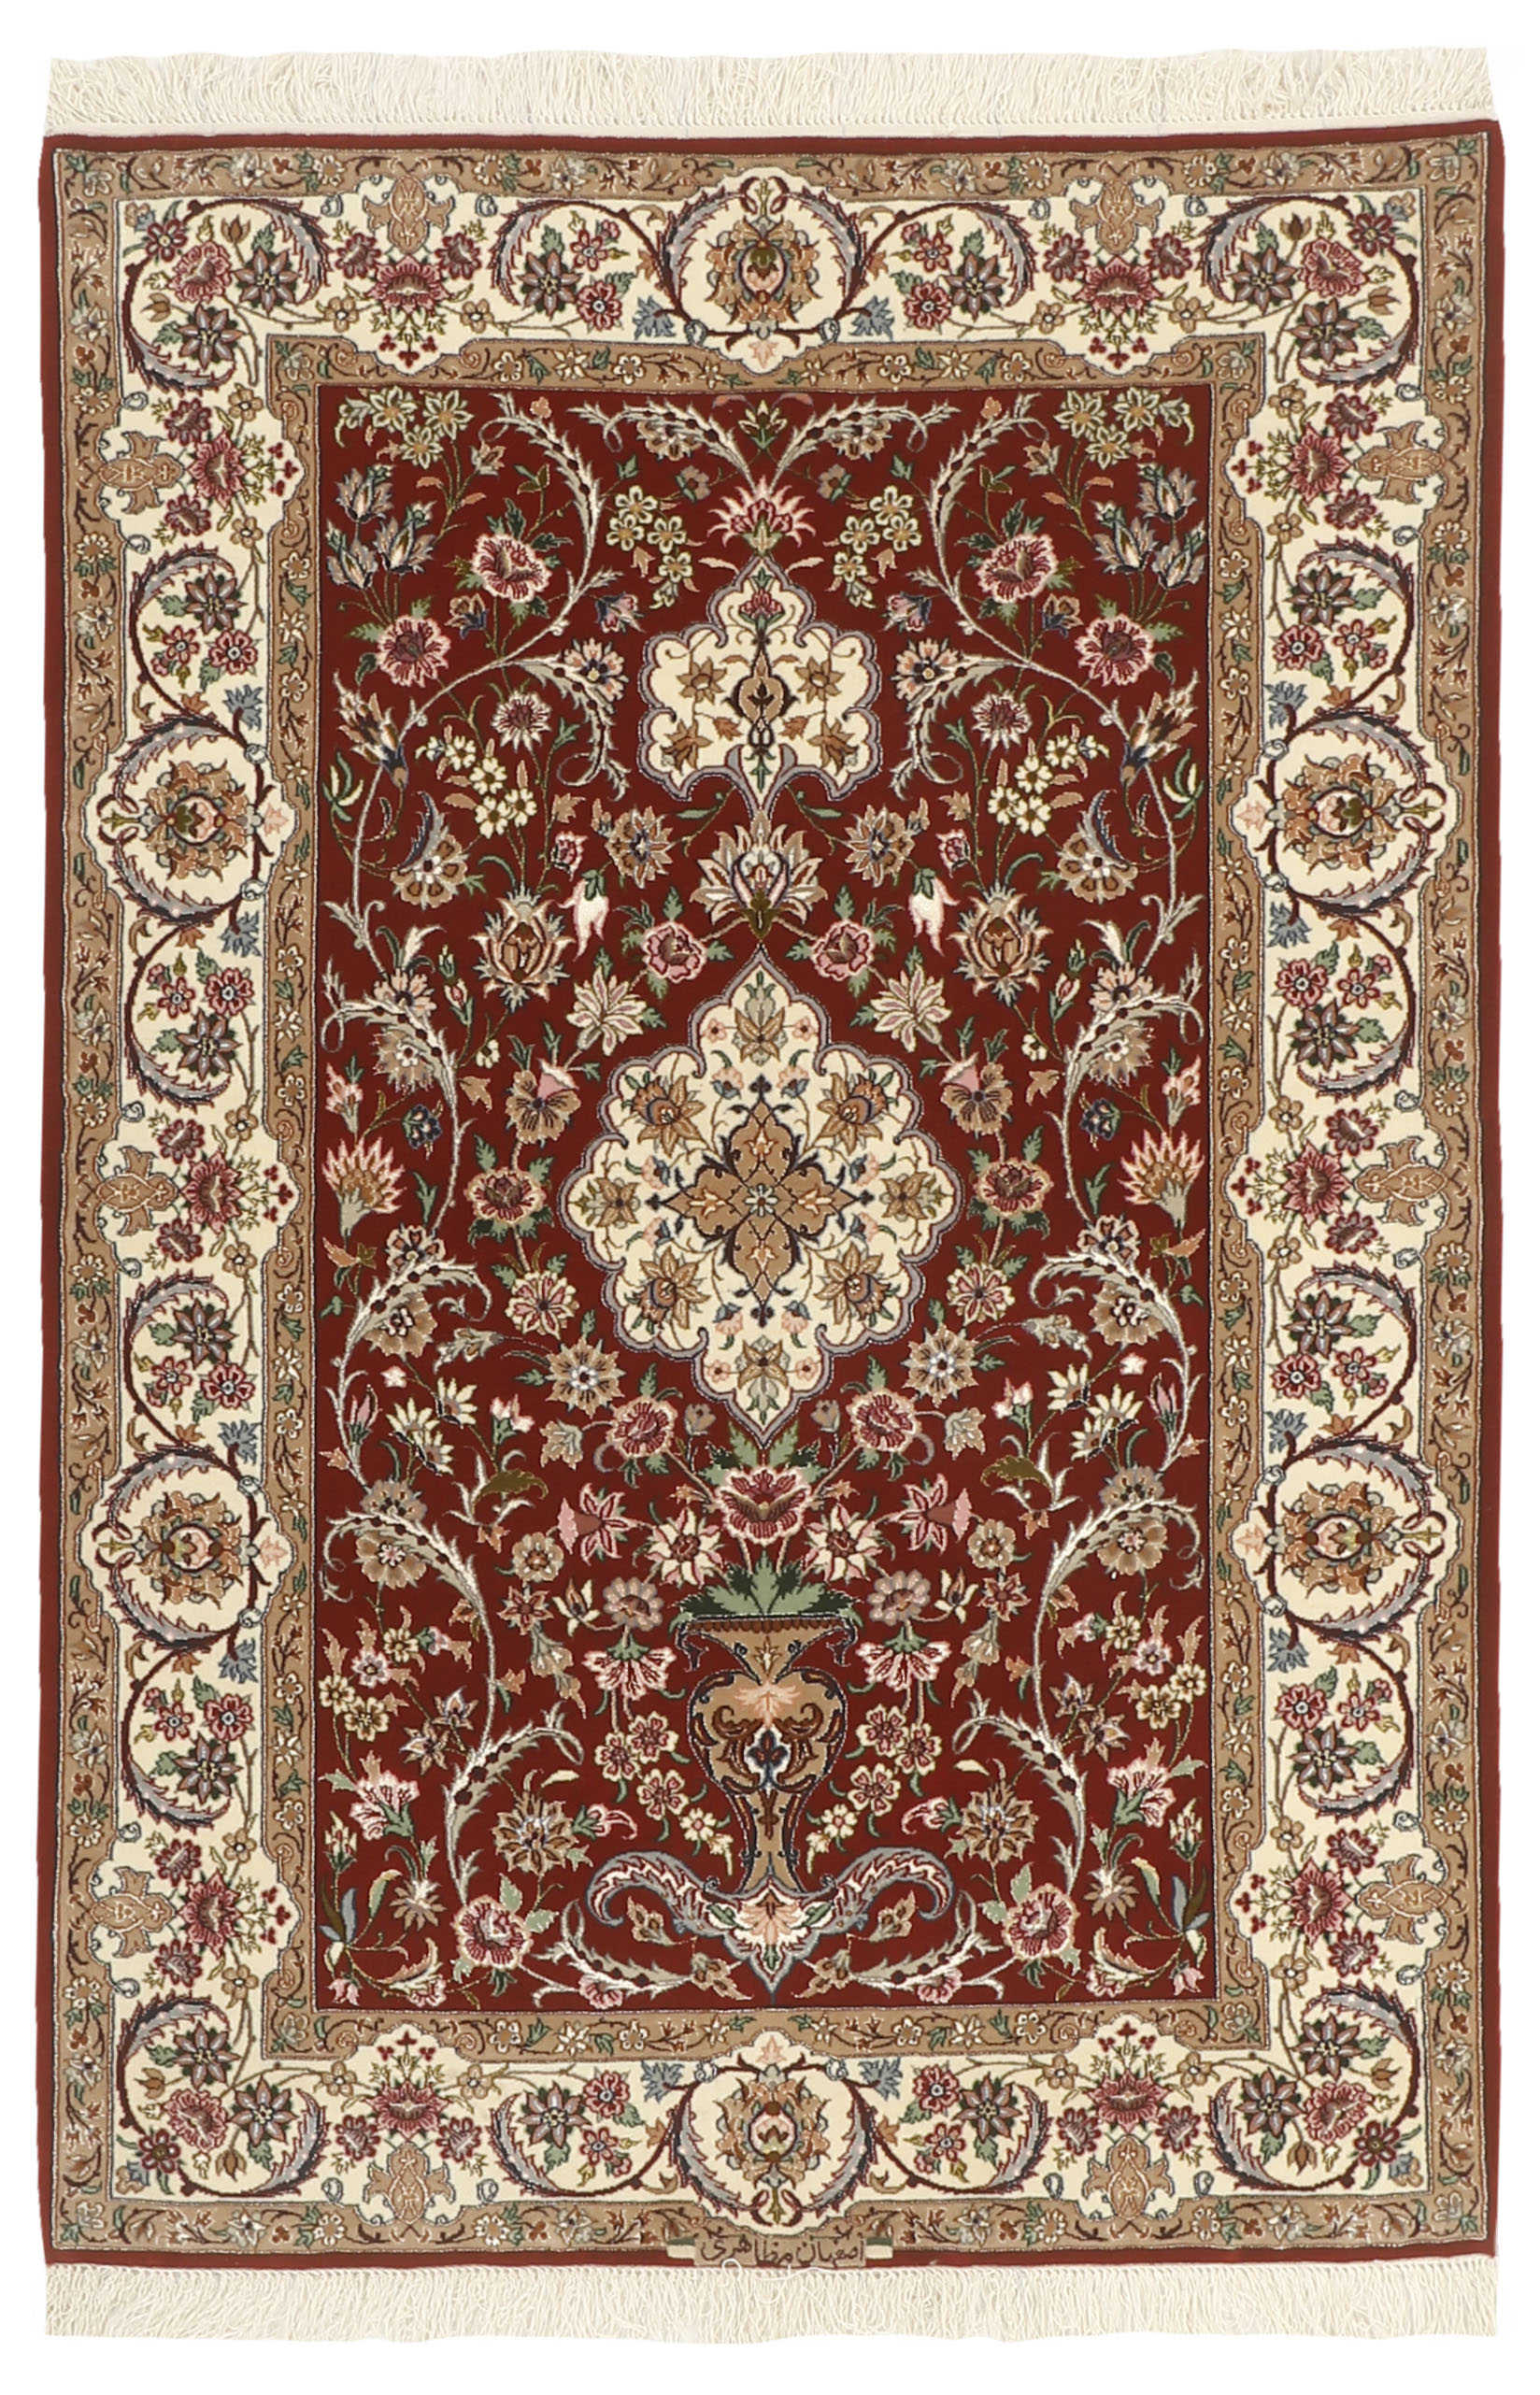 Authentic persian rug with traditional pattern in red, blue and ivory